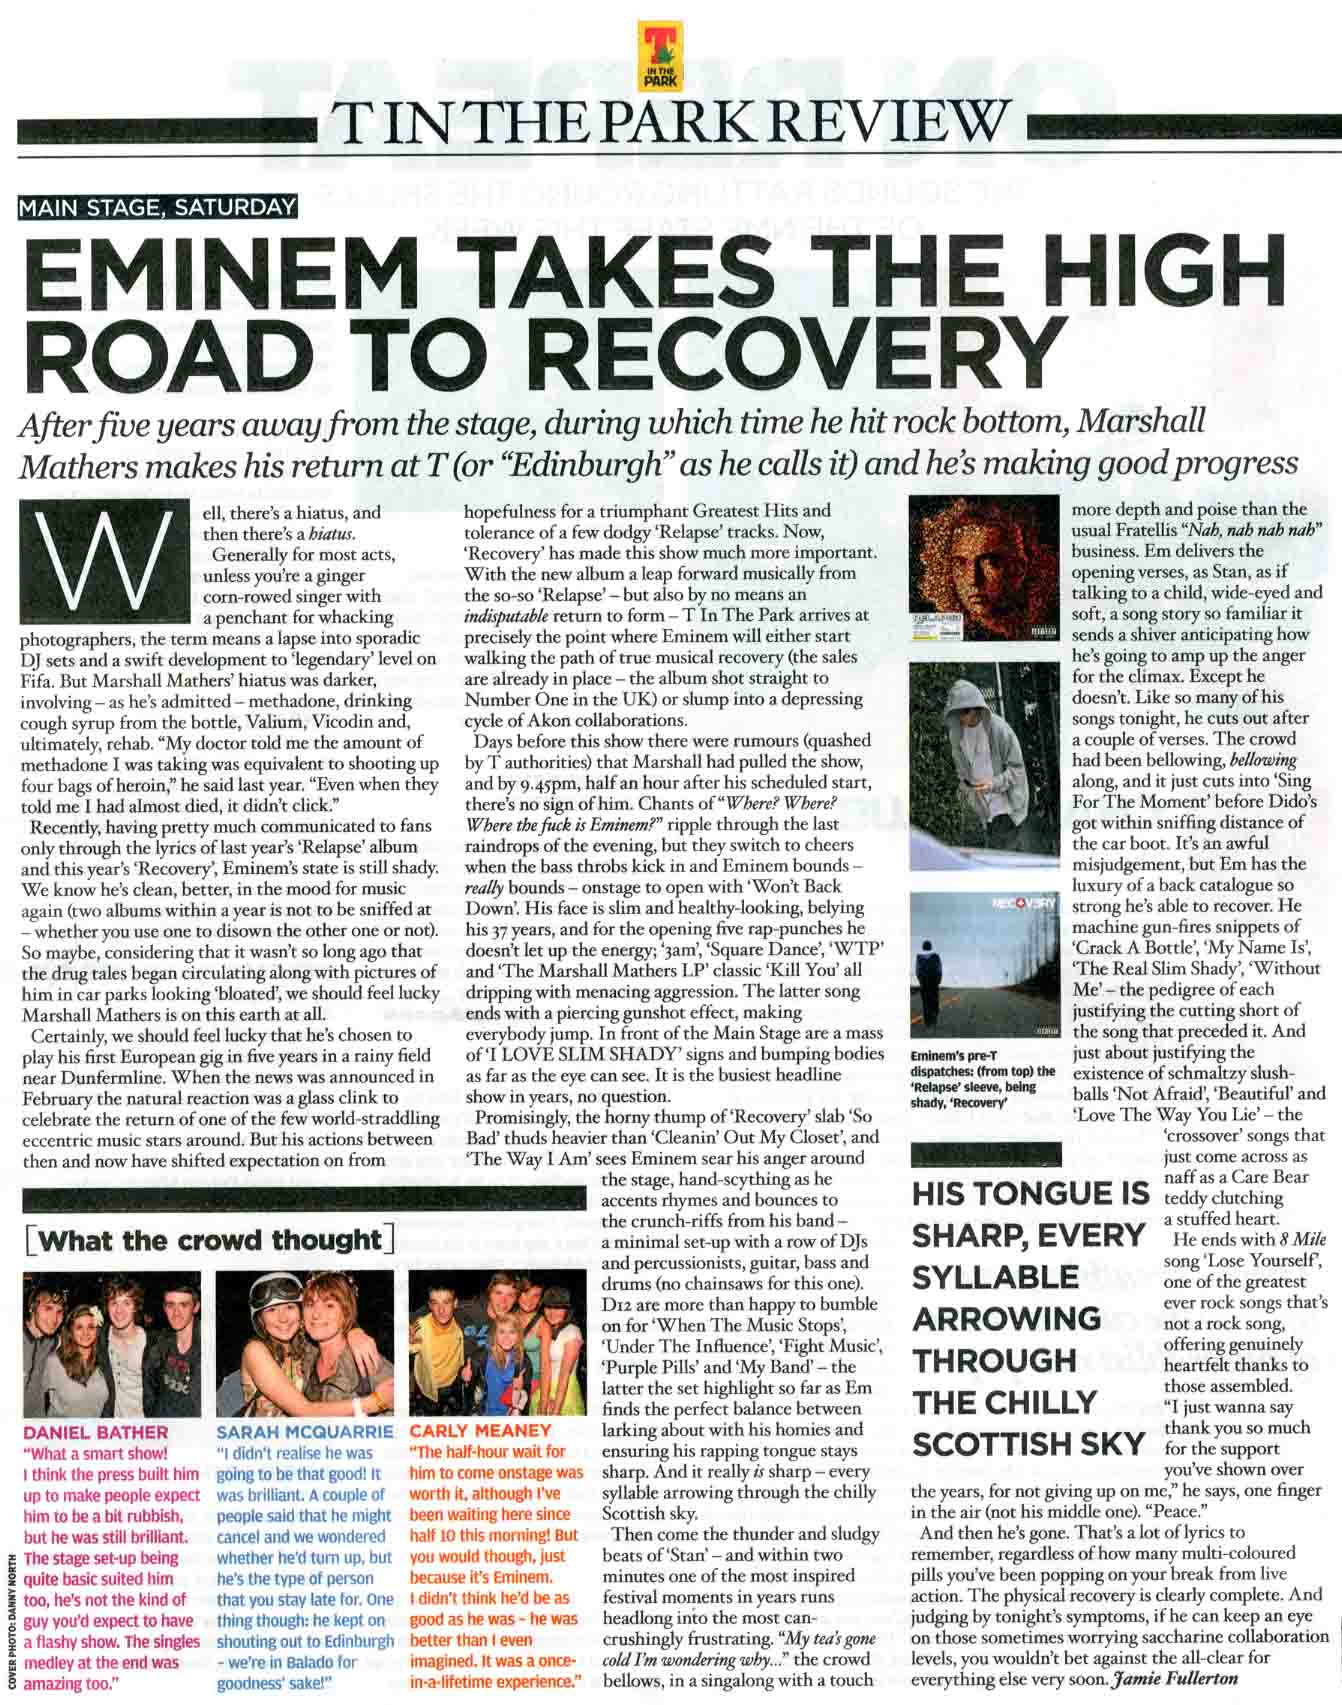 Eminem Covers NME Magazine | HipHop-N-More1342 x 1705